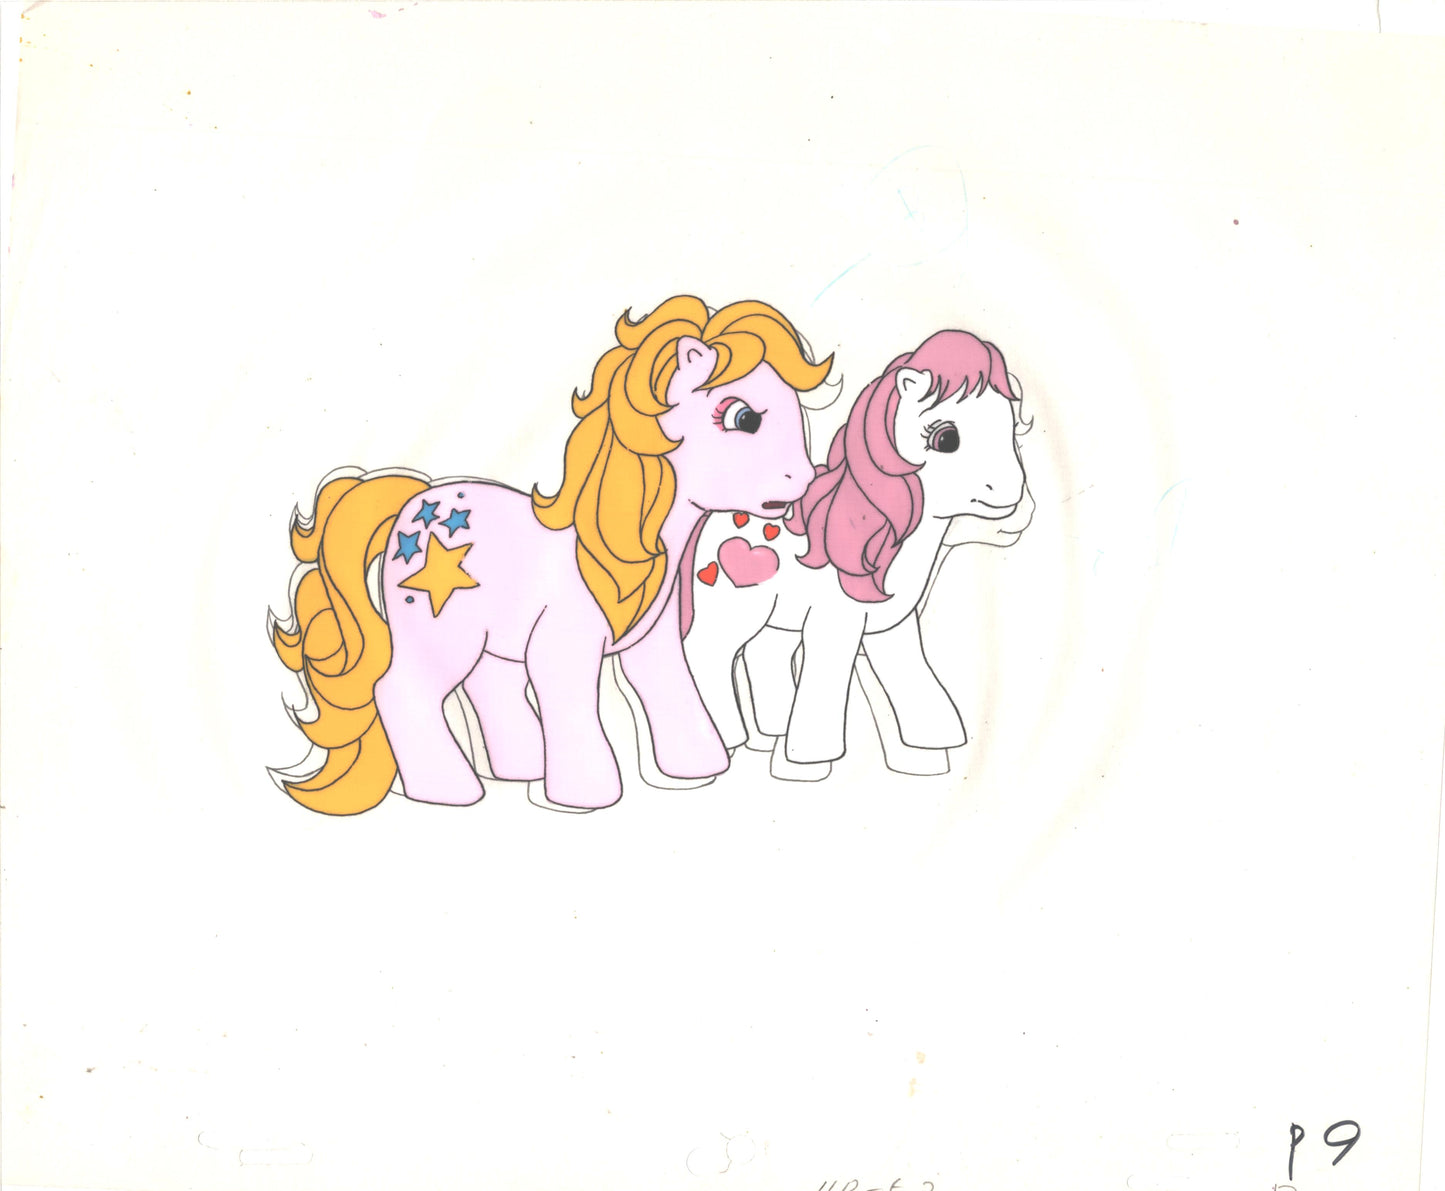 My Little Pony Original Production Animation Cel Hasbro Sunbow 1980s or 90s Used to Make the Cartoon J-P9